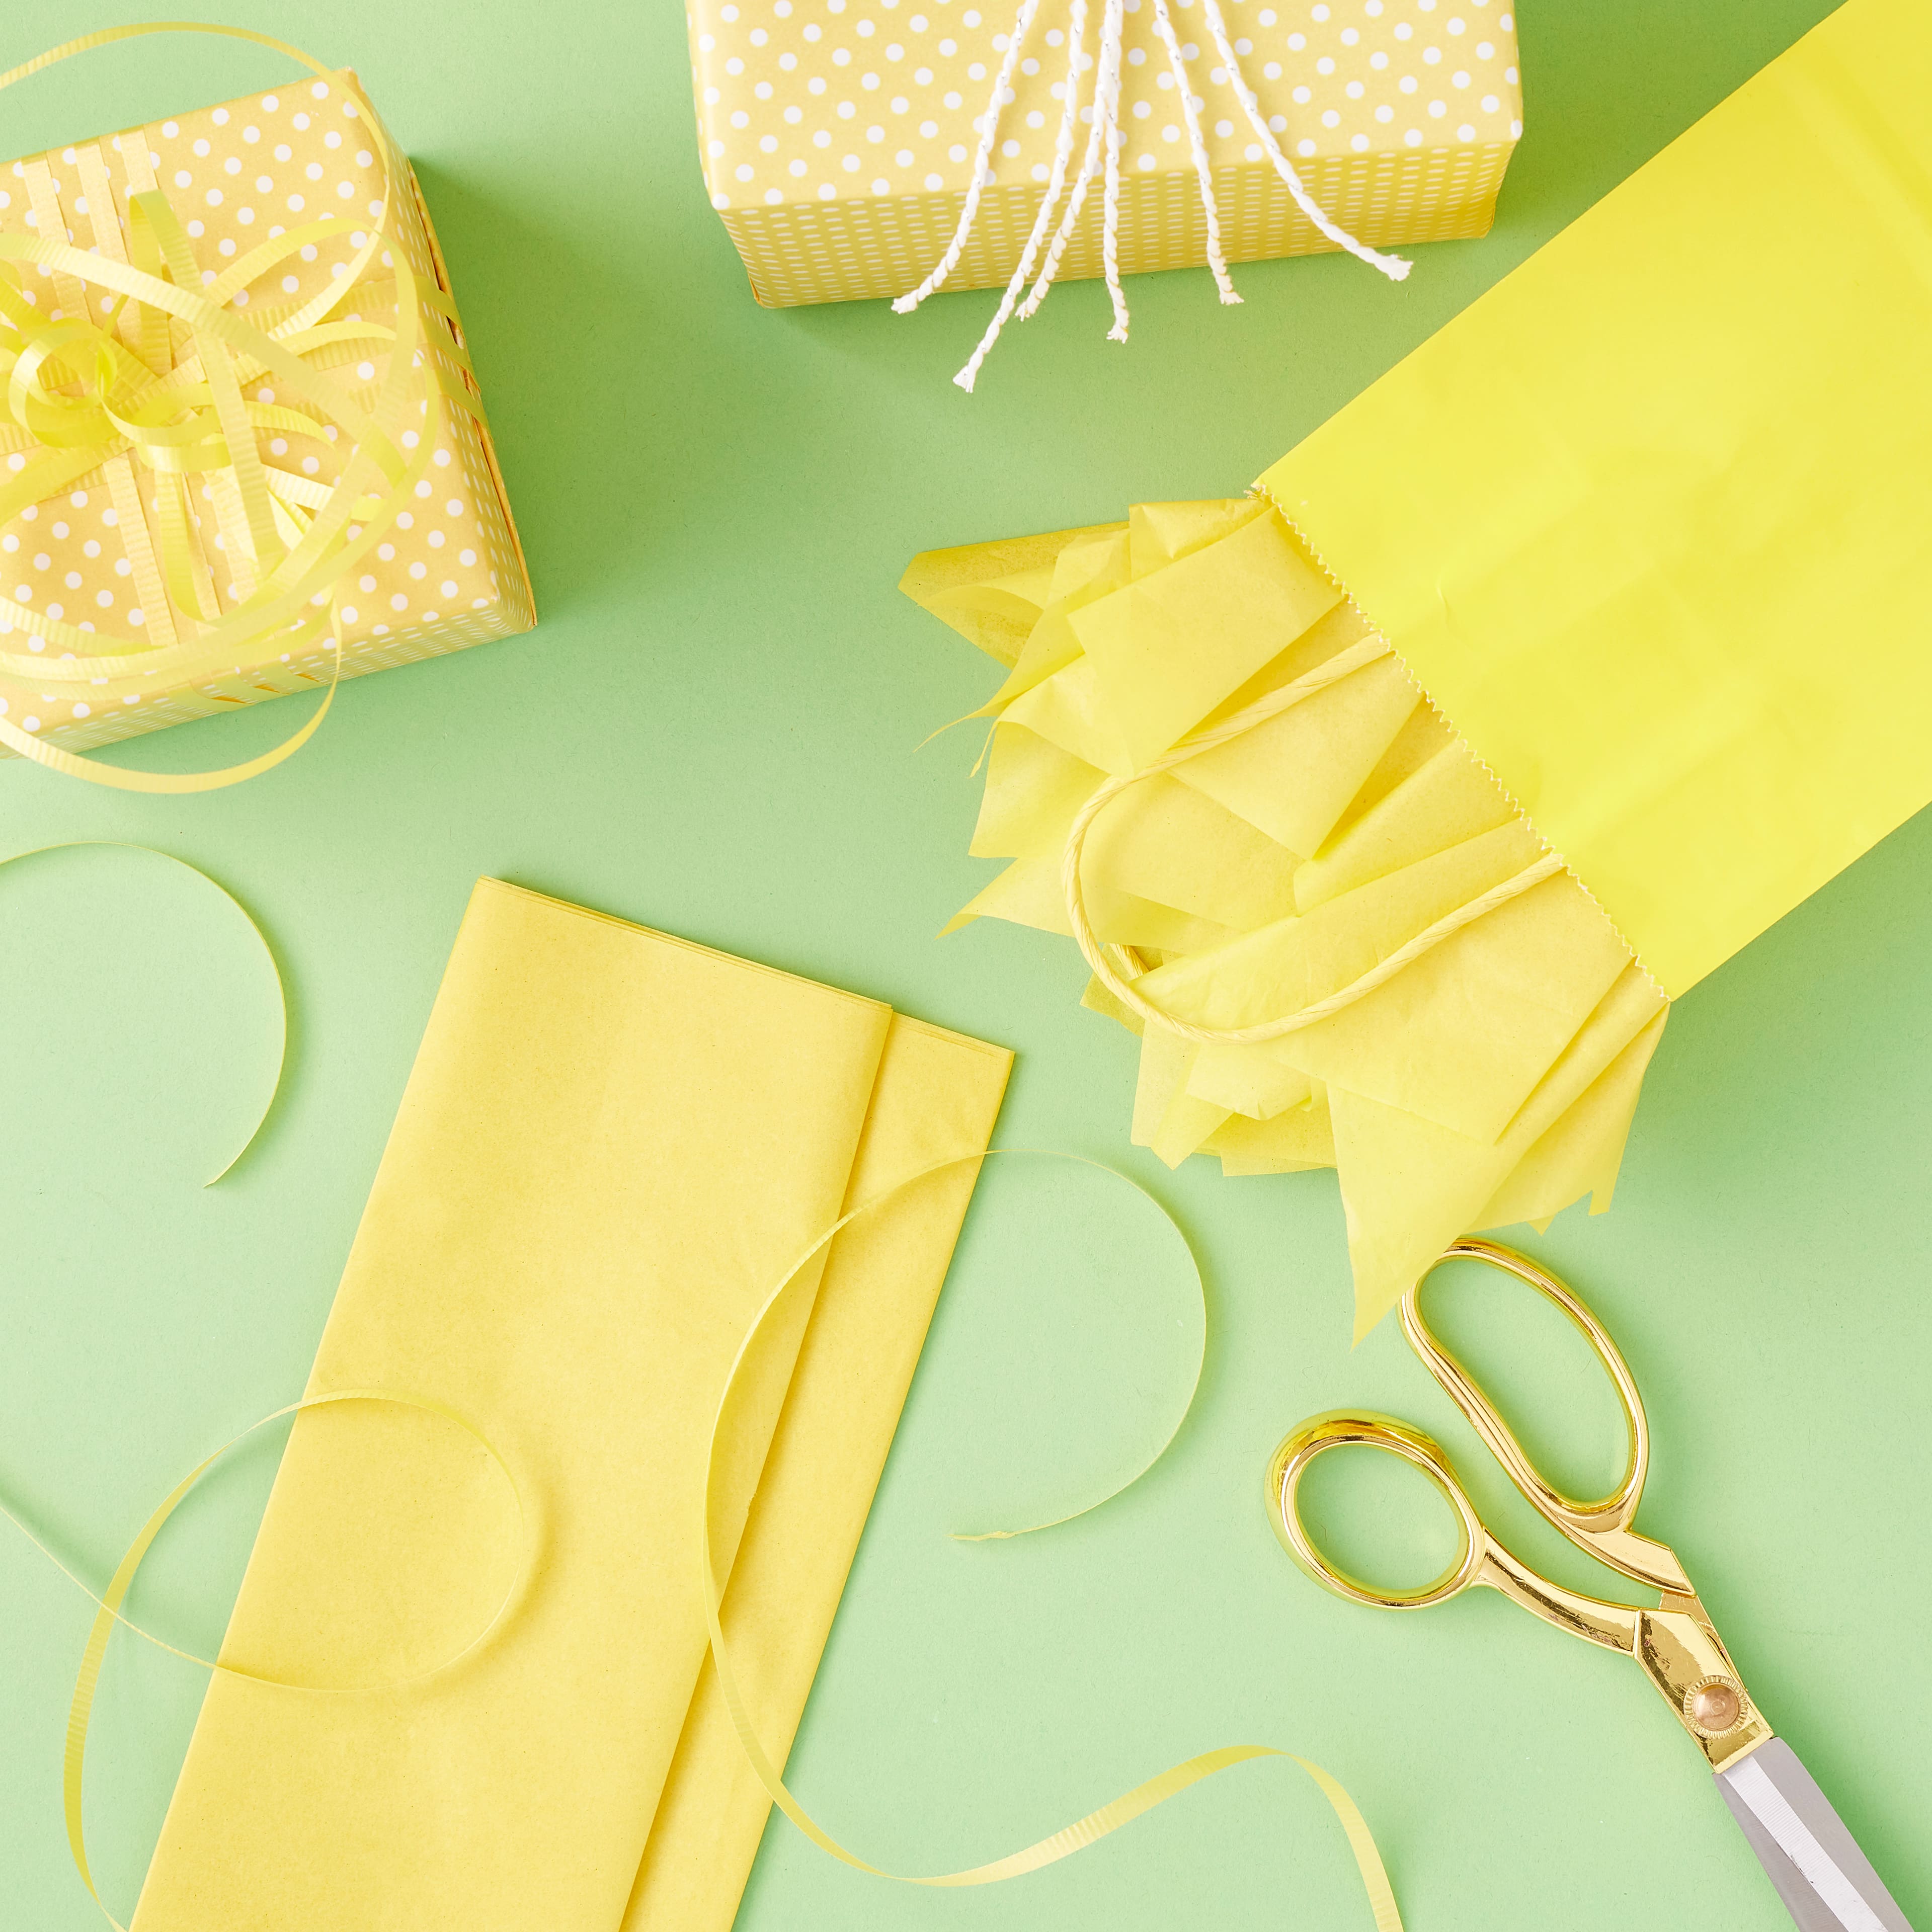 Orange & Yellow Ombre Tissue Paper Sheets by Celebrate It™